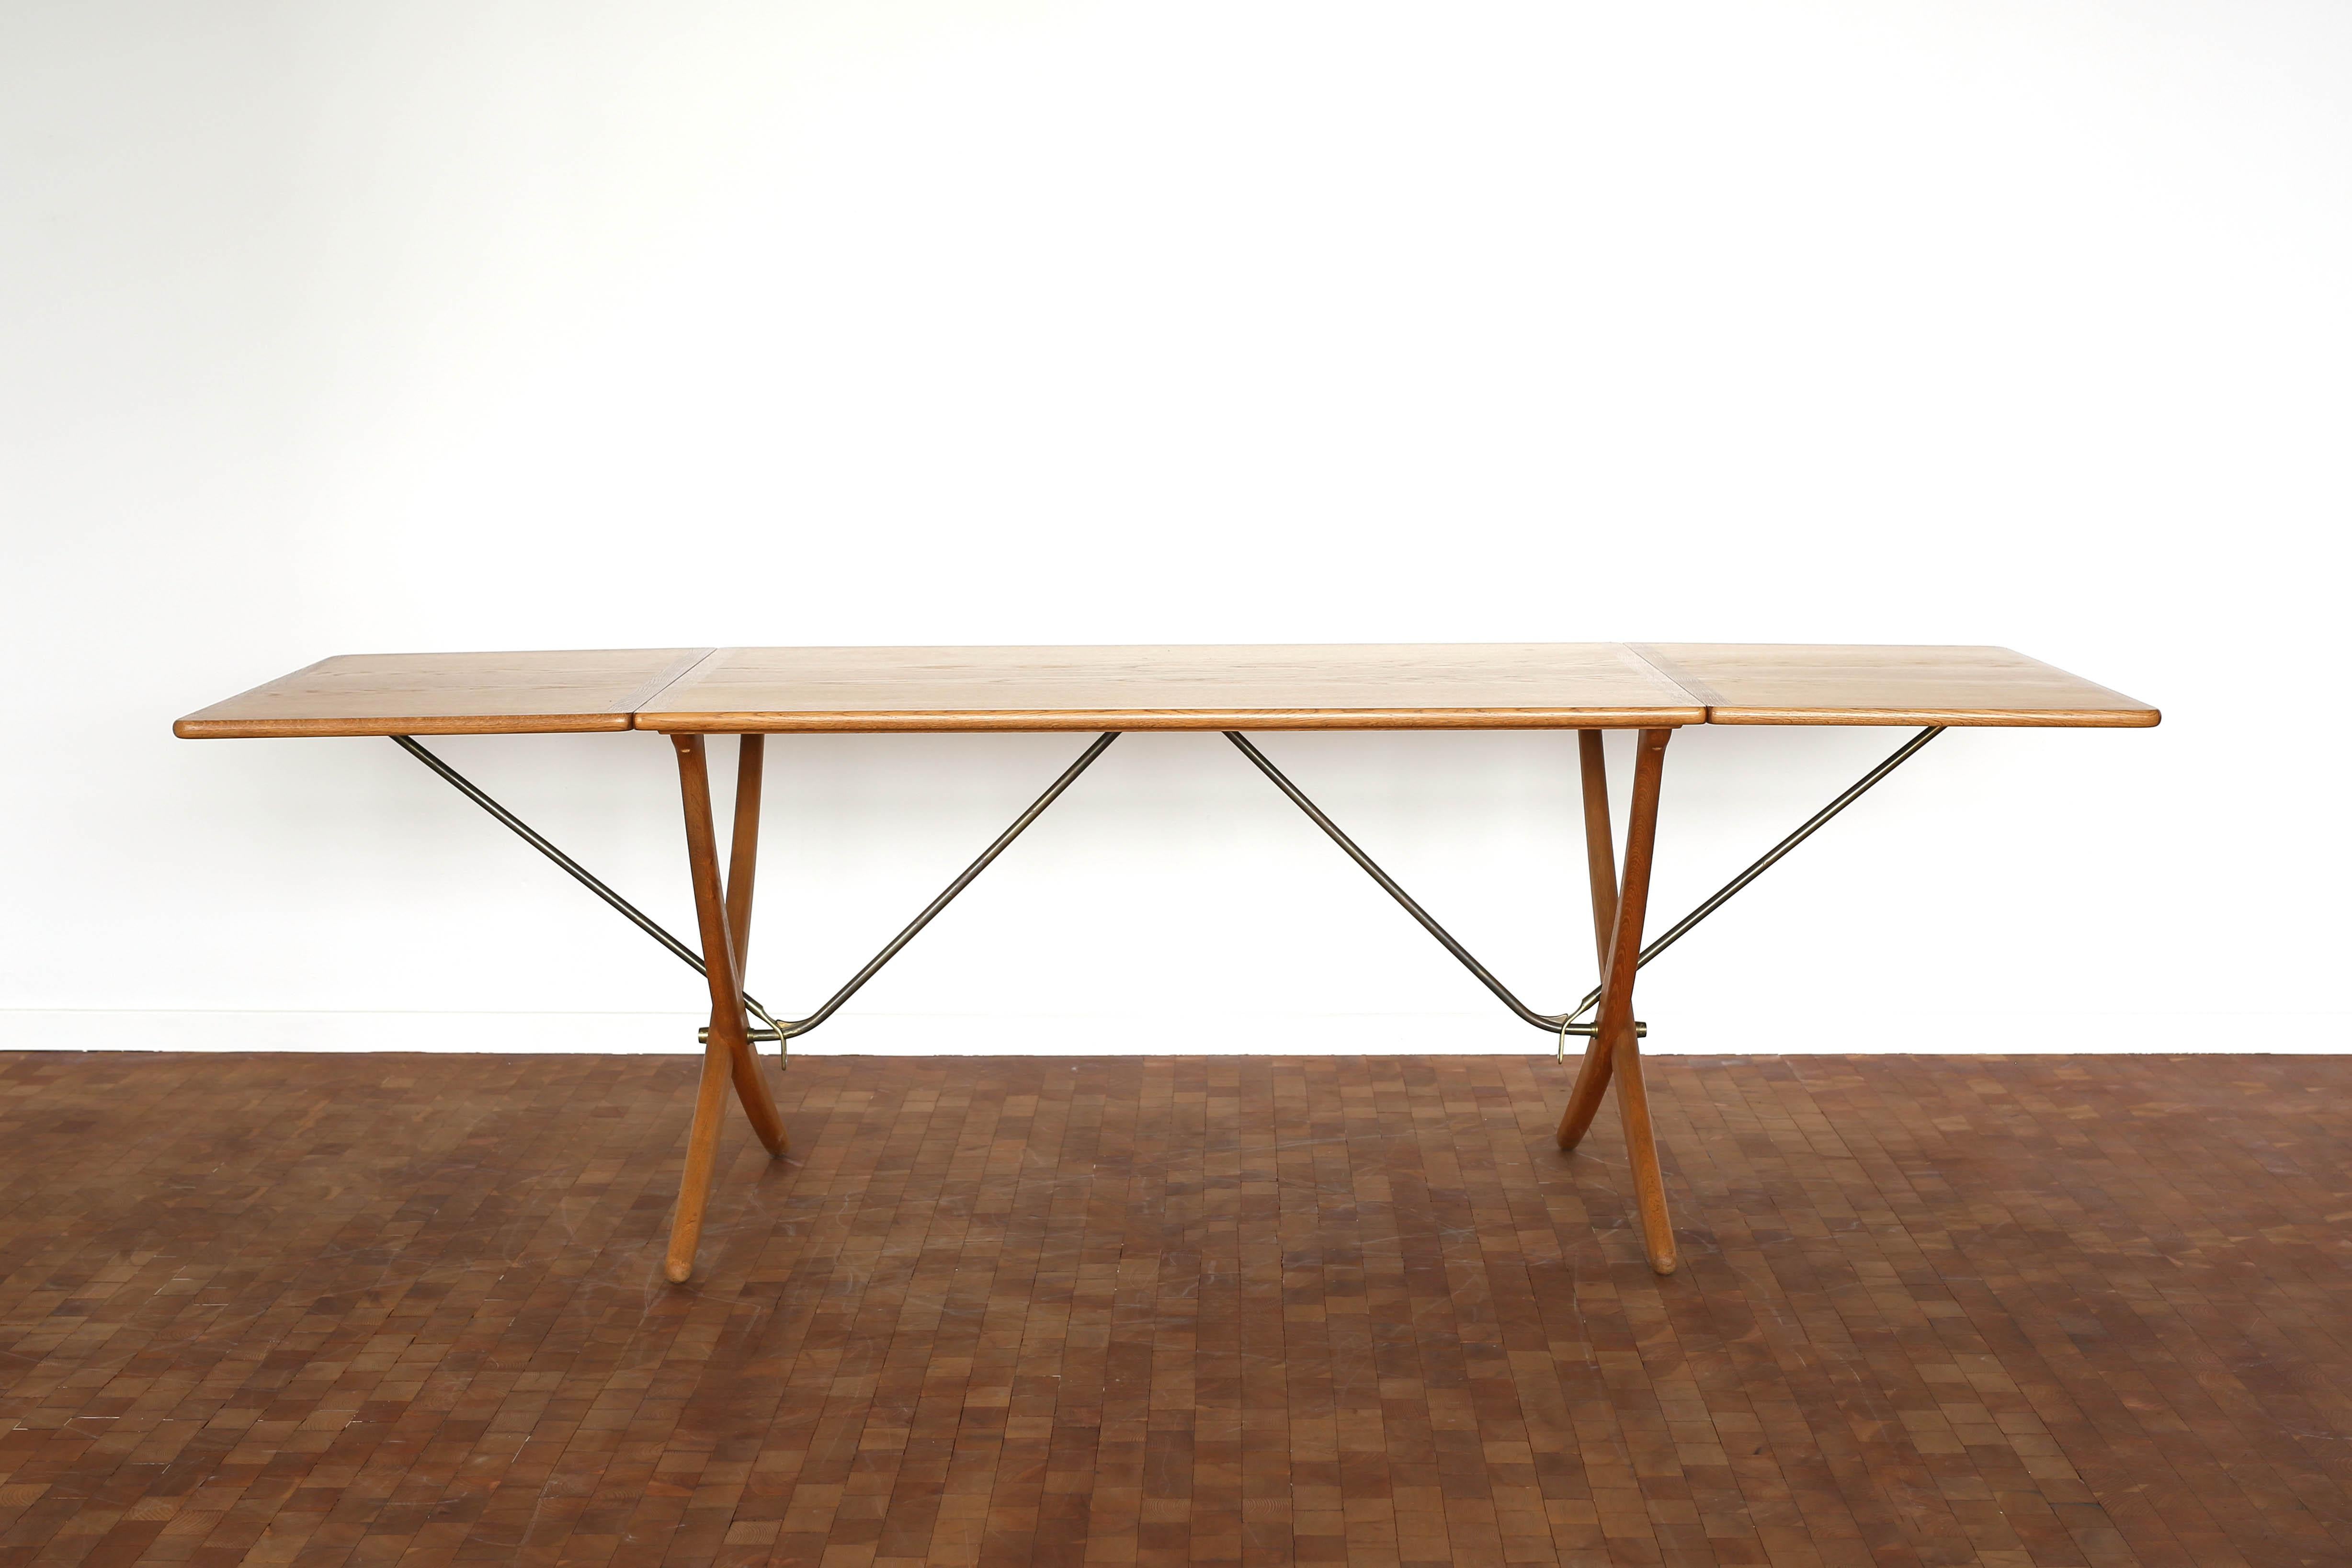 Hans J. Wegner oak dining table with two drop-leaves and cross-legs, stretchers of brass. Very fine condition. 

Designed by Wegner 1950 and manufactured by cabinetmaker Andreas Tuck, Denmark, model AT304. Marked by Maker. 

Measuring 128 cm /50